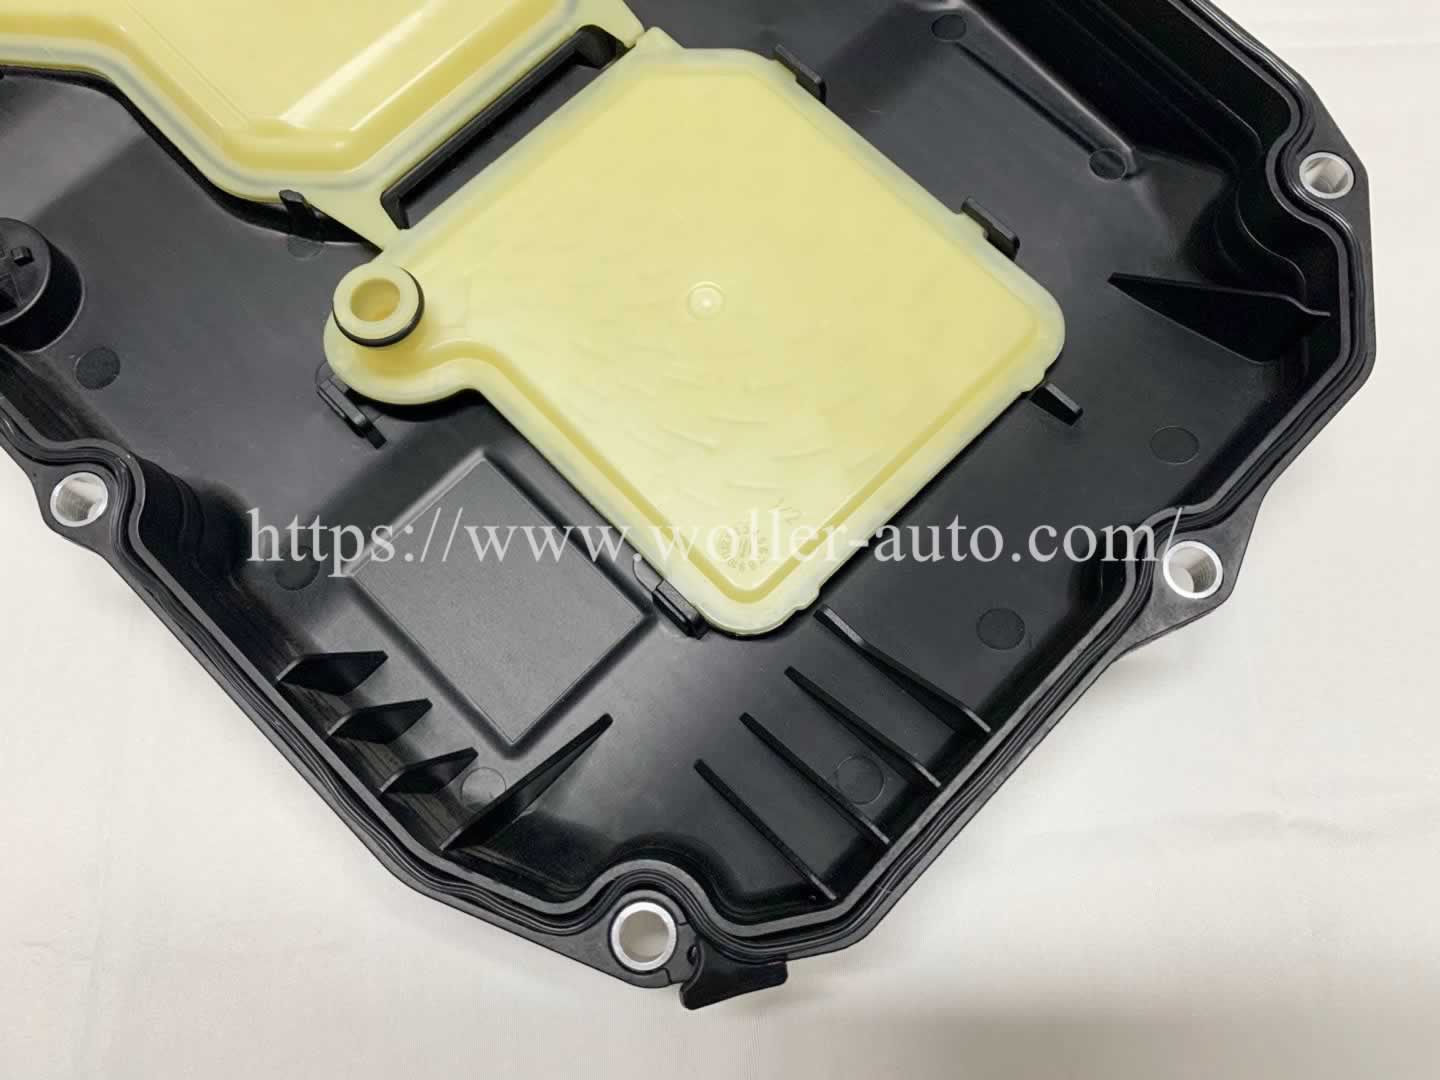 Automatic Transmission Oil Pan OE 7252703707 A7252703707 For Mercedes Benz E300 CLS GLC GLE GLS 16-18